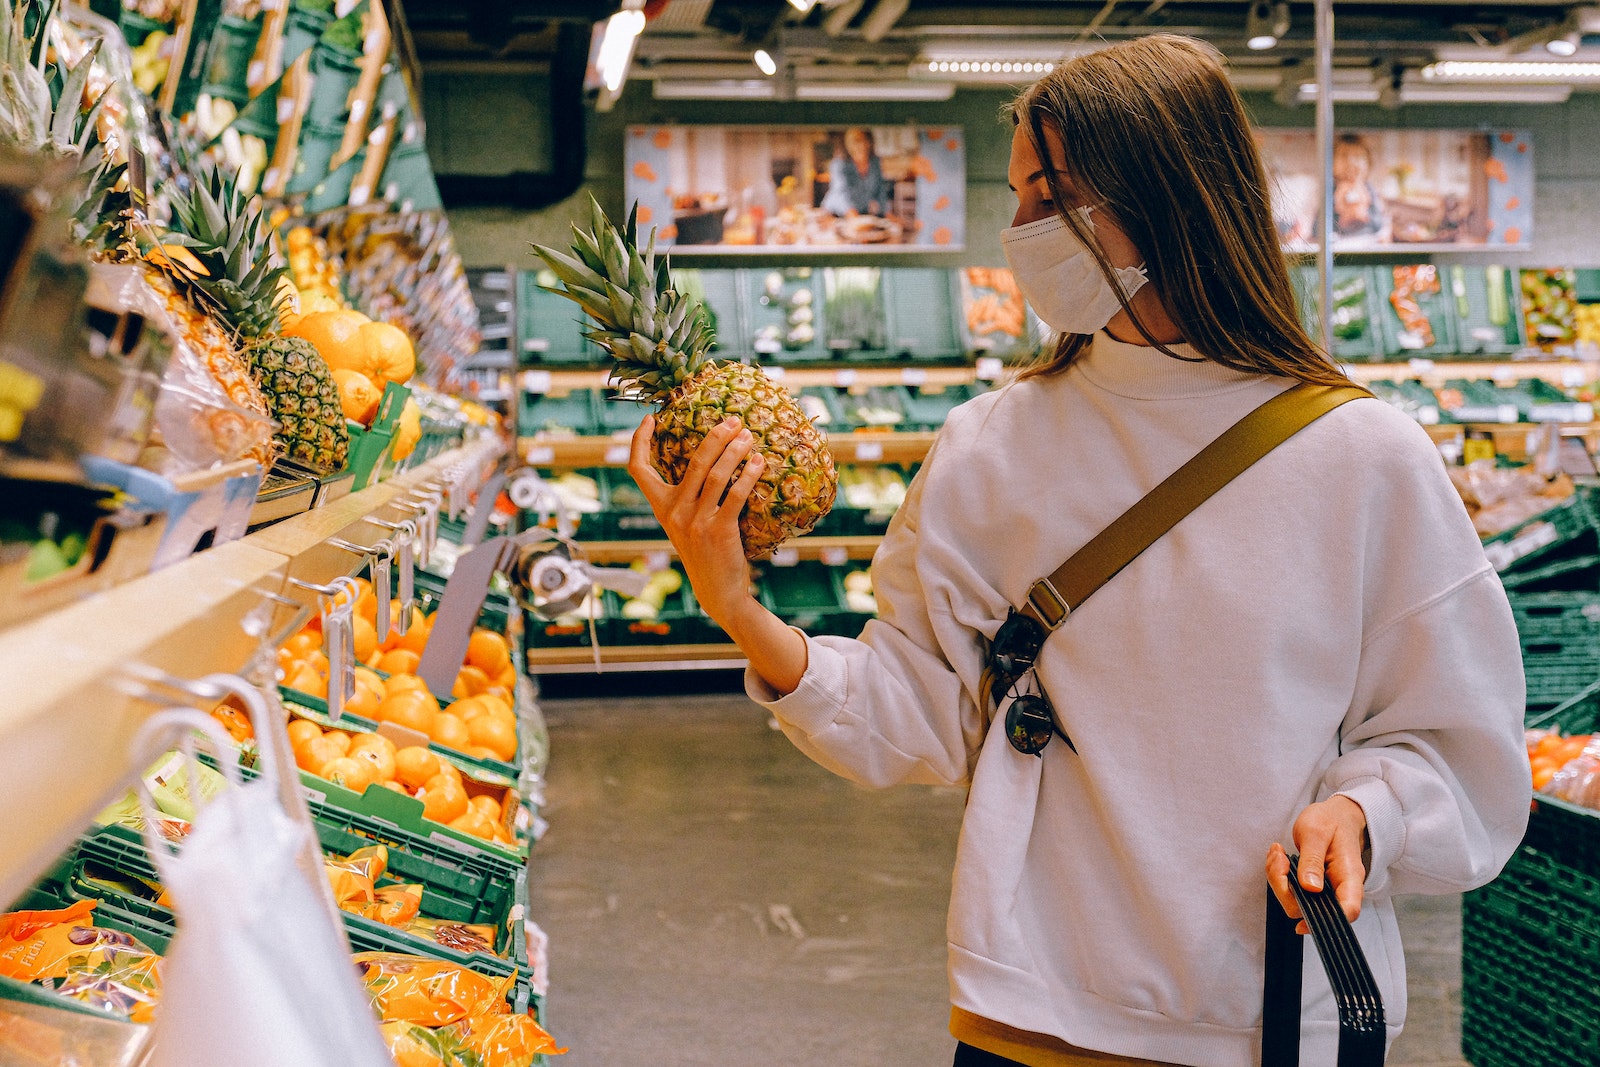 Woman in Supermarket holding a pineapple